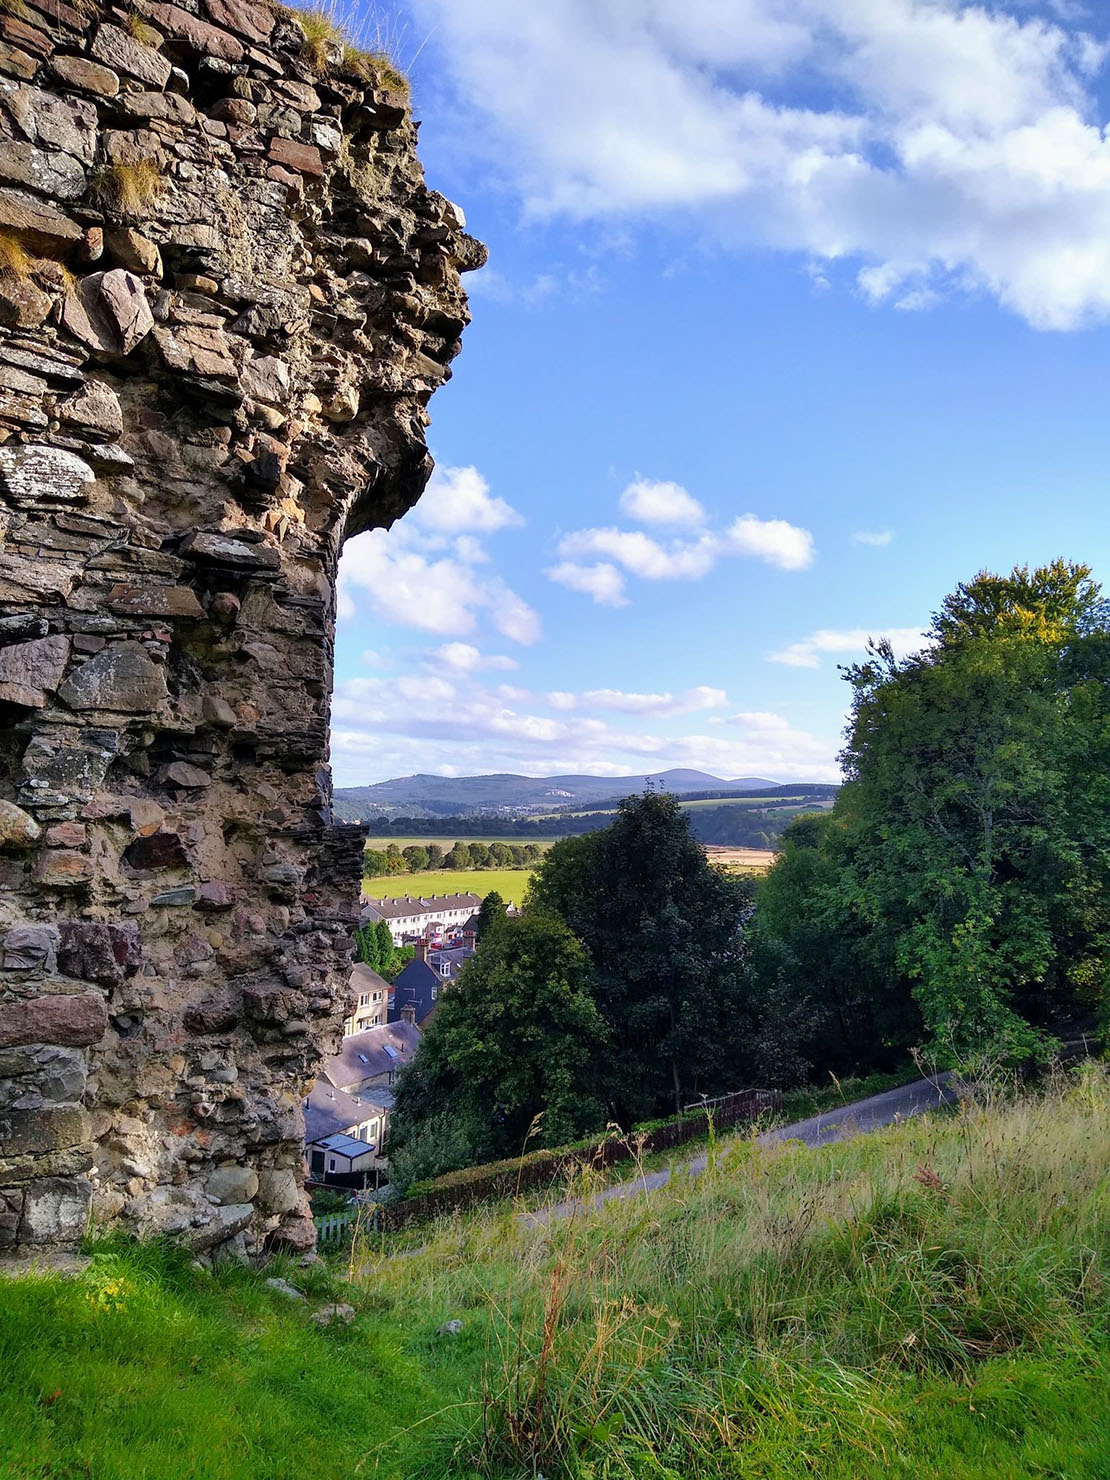 Earl of Rothes. East view from castle.